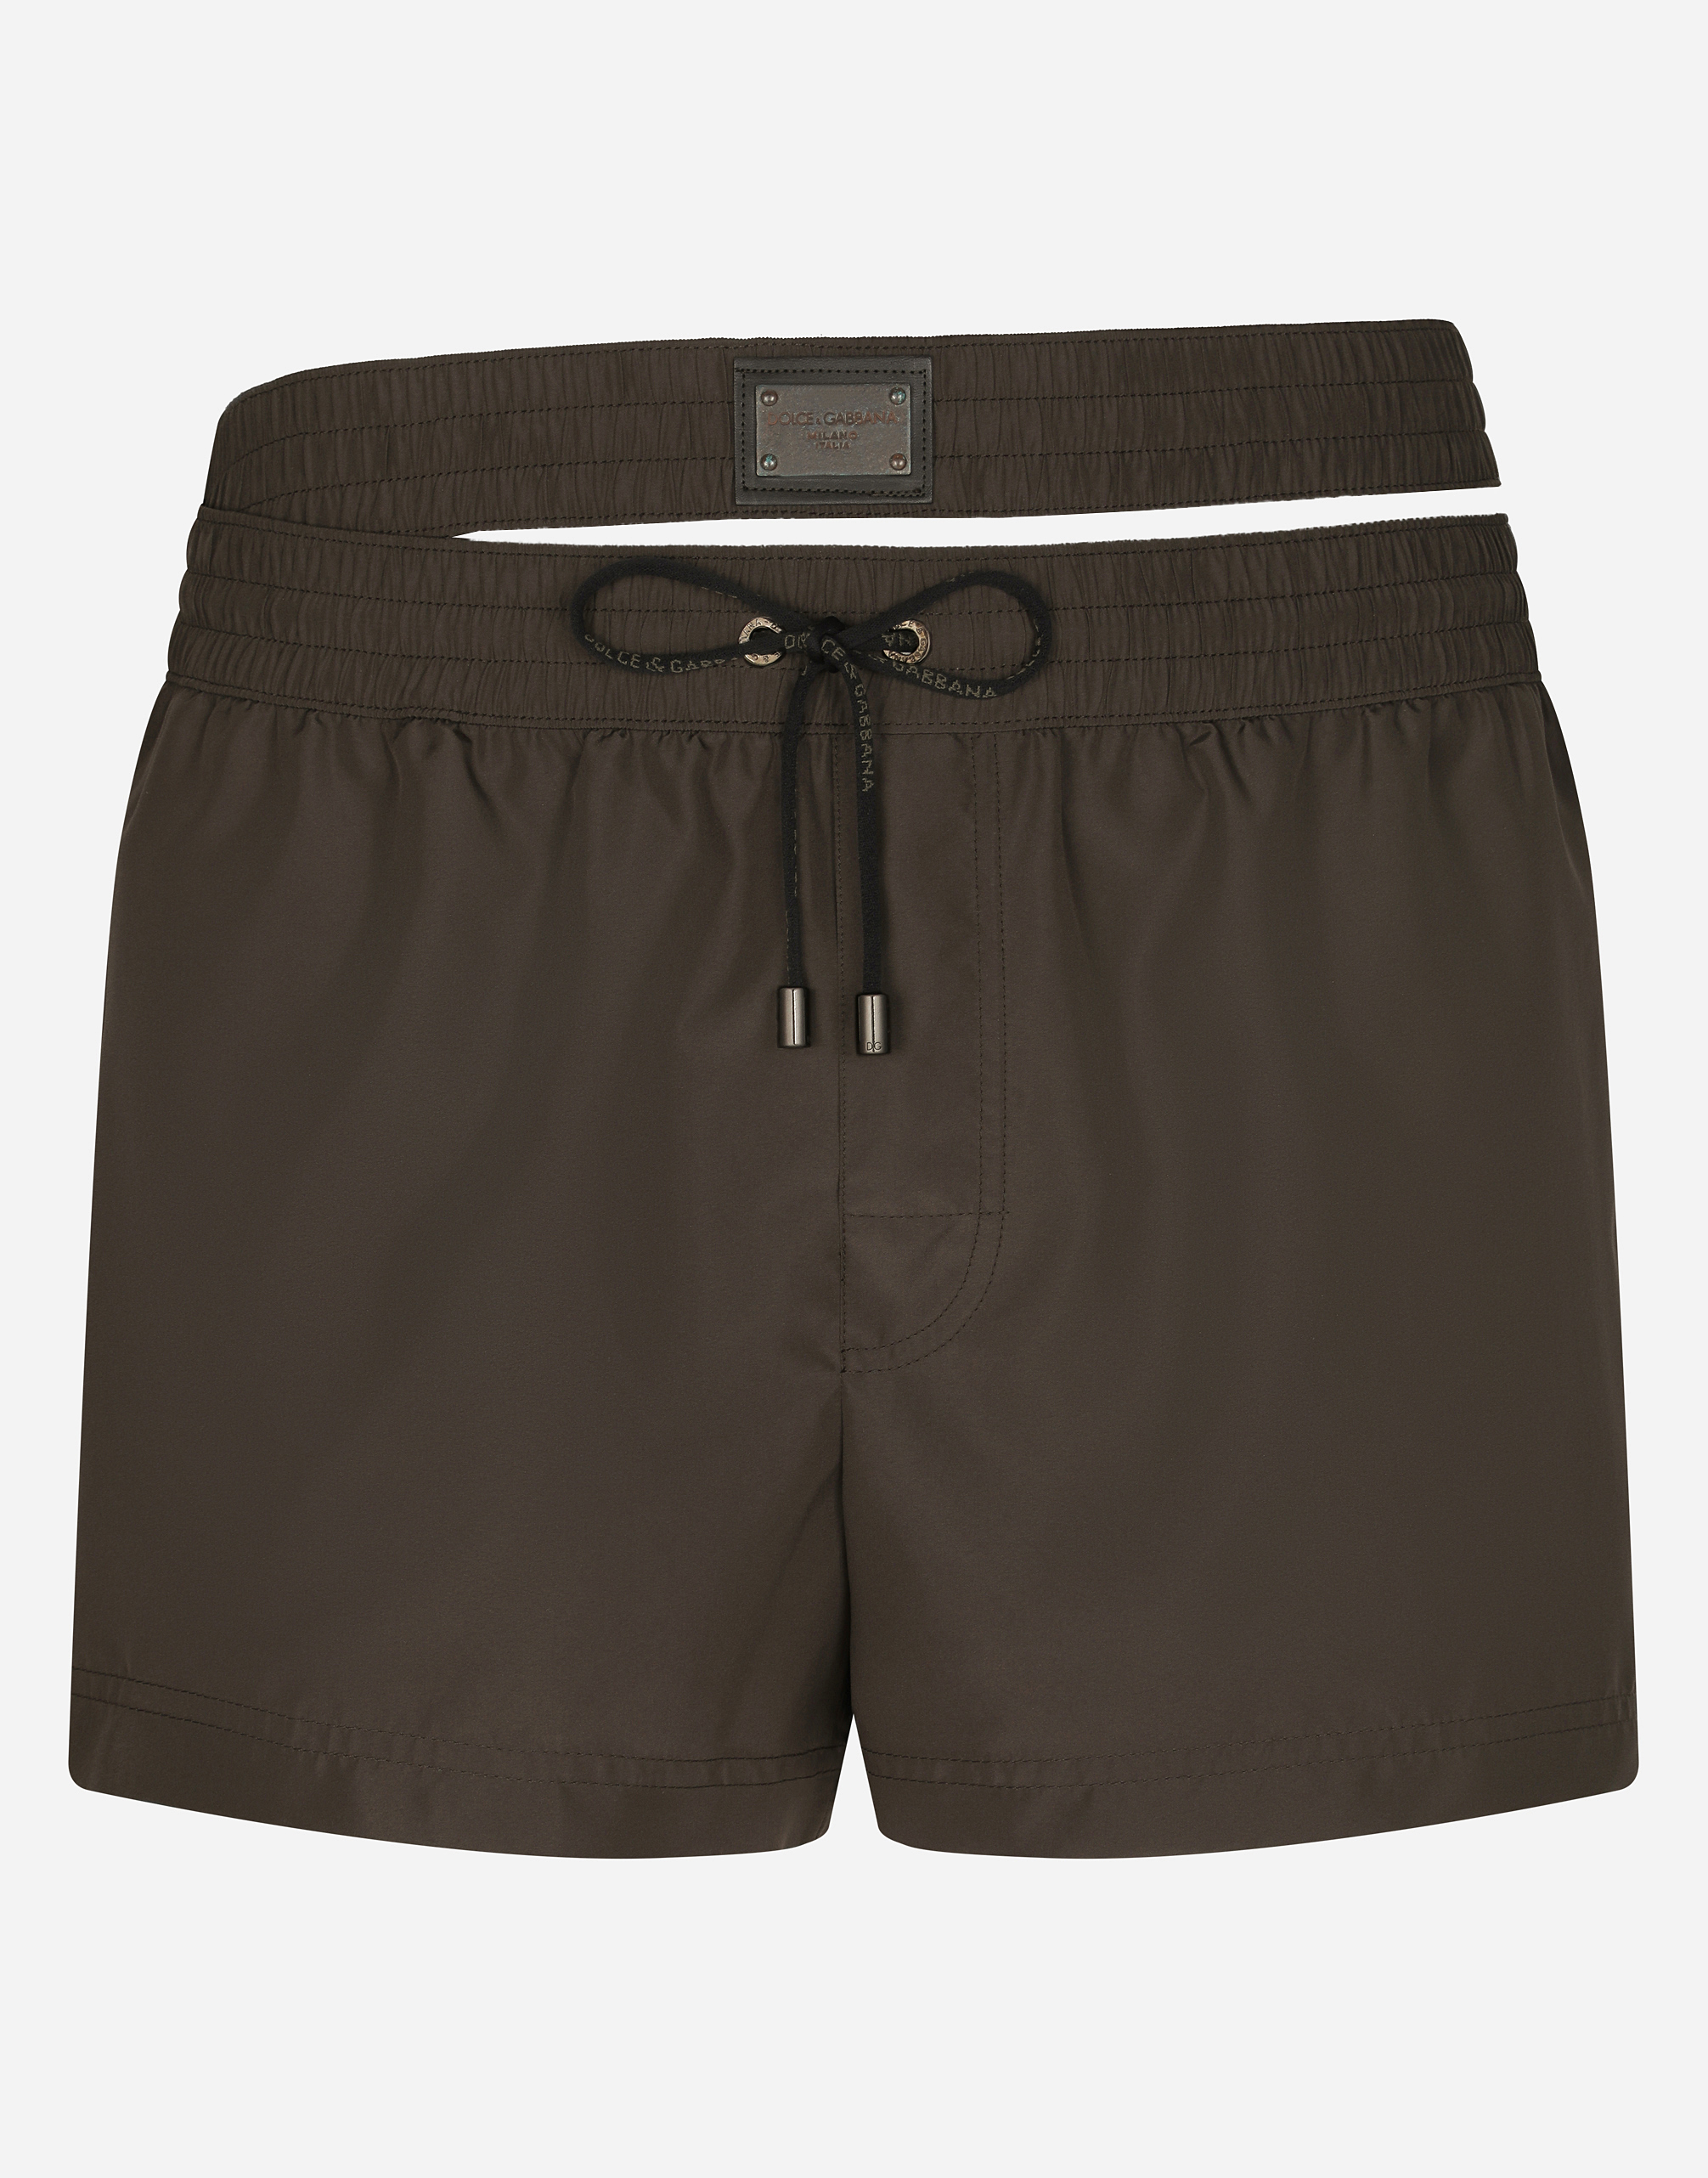 Short swim trunks with double waistband and branded tag in Multicolor